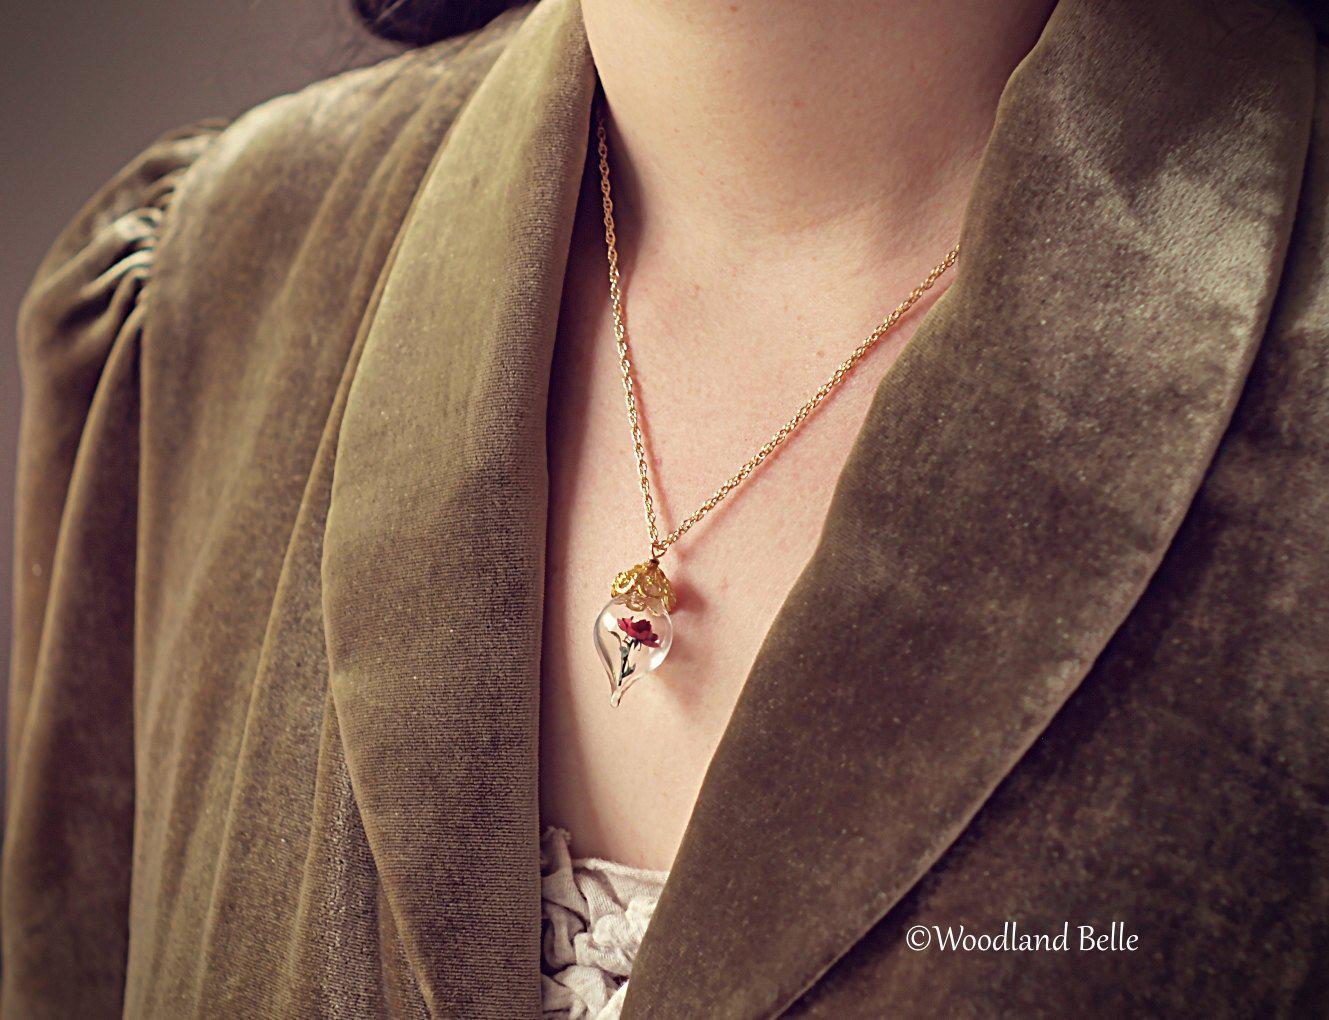 Pink Peony Necklace - Gold Glass Flower Pendant - Personalized Gift / Wife, Anniversary - Gold/Sterling Silver/Rose Gold -By Woodland Belle